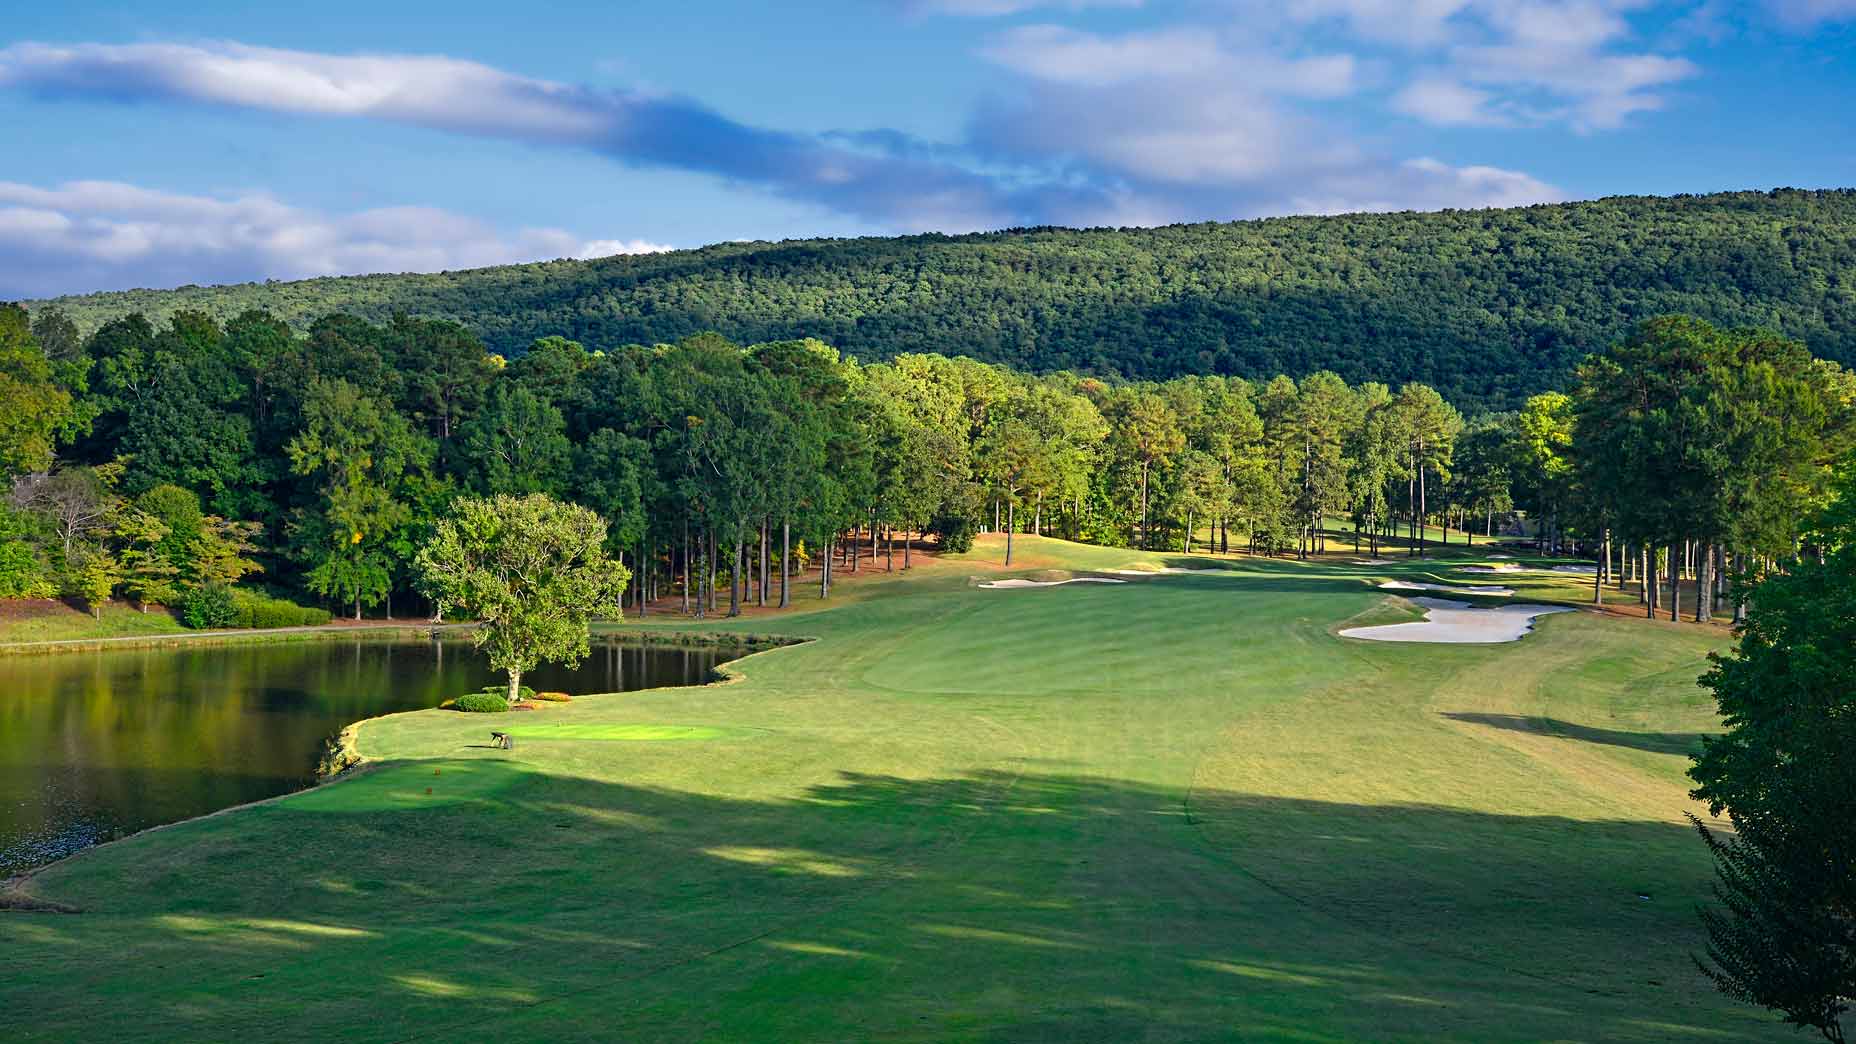 Best golf courses in Alabama, according to GOLF Magazine's raters